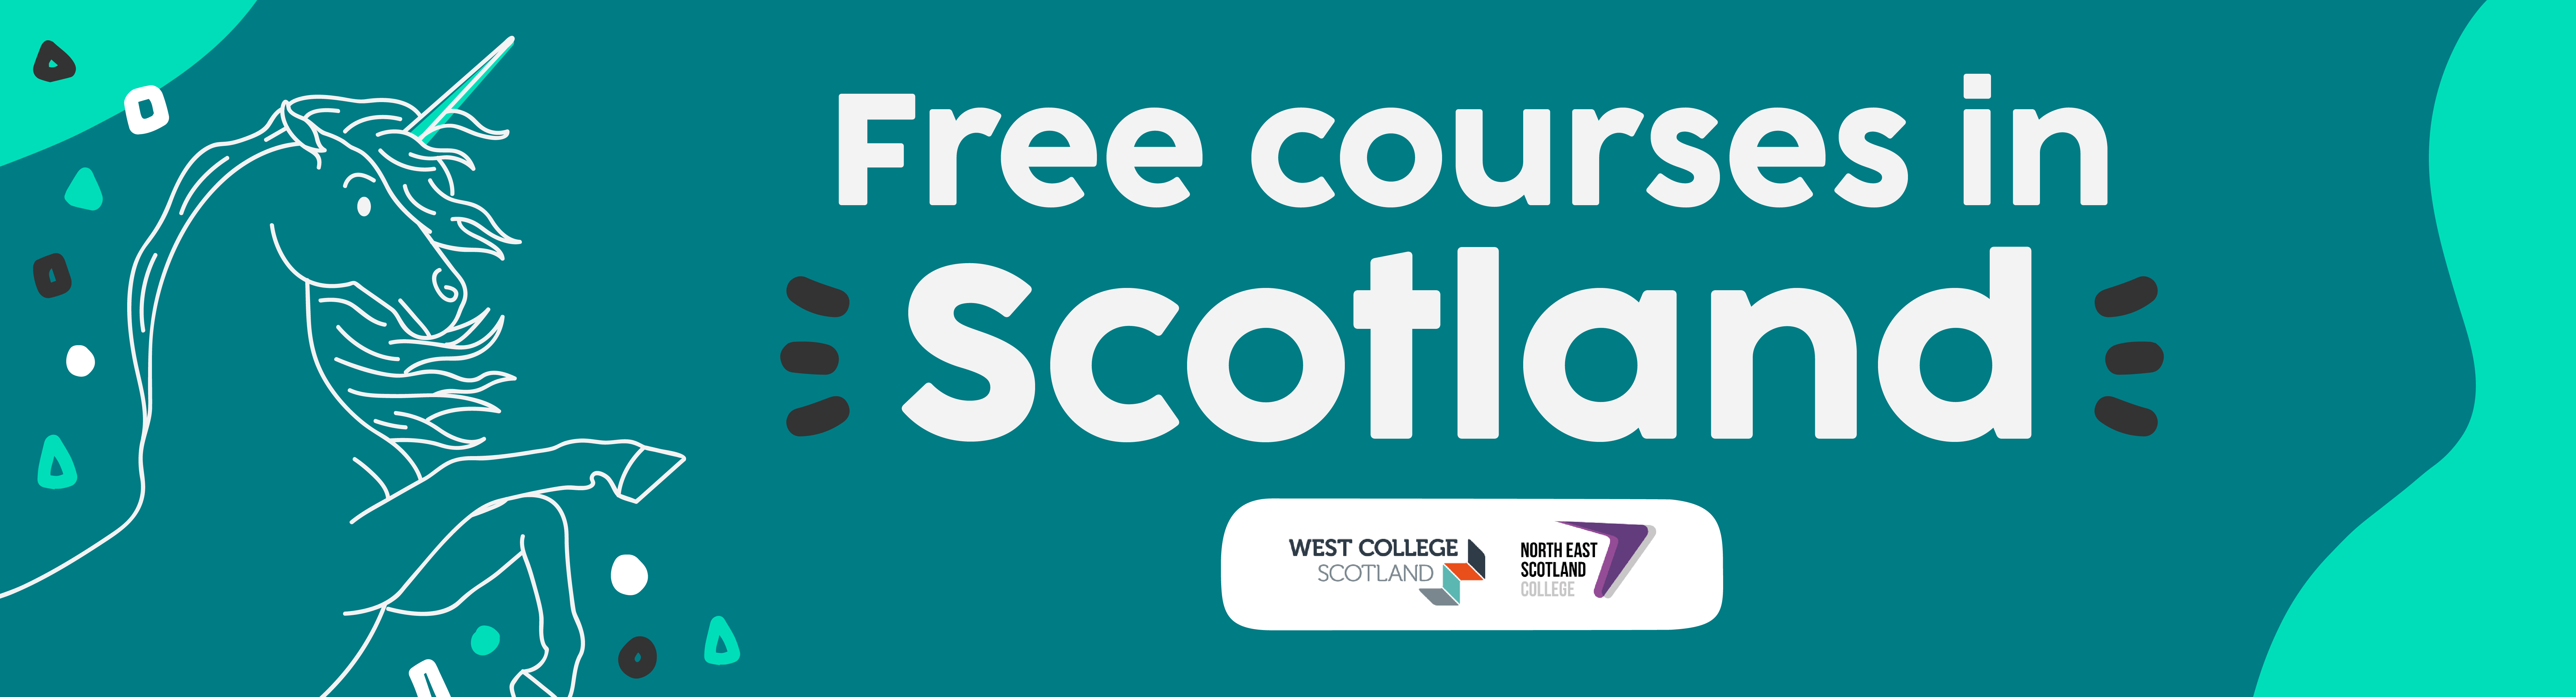 free online courses in Scotland with The Skills Network